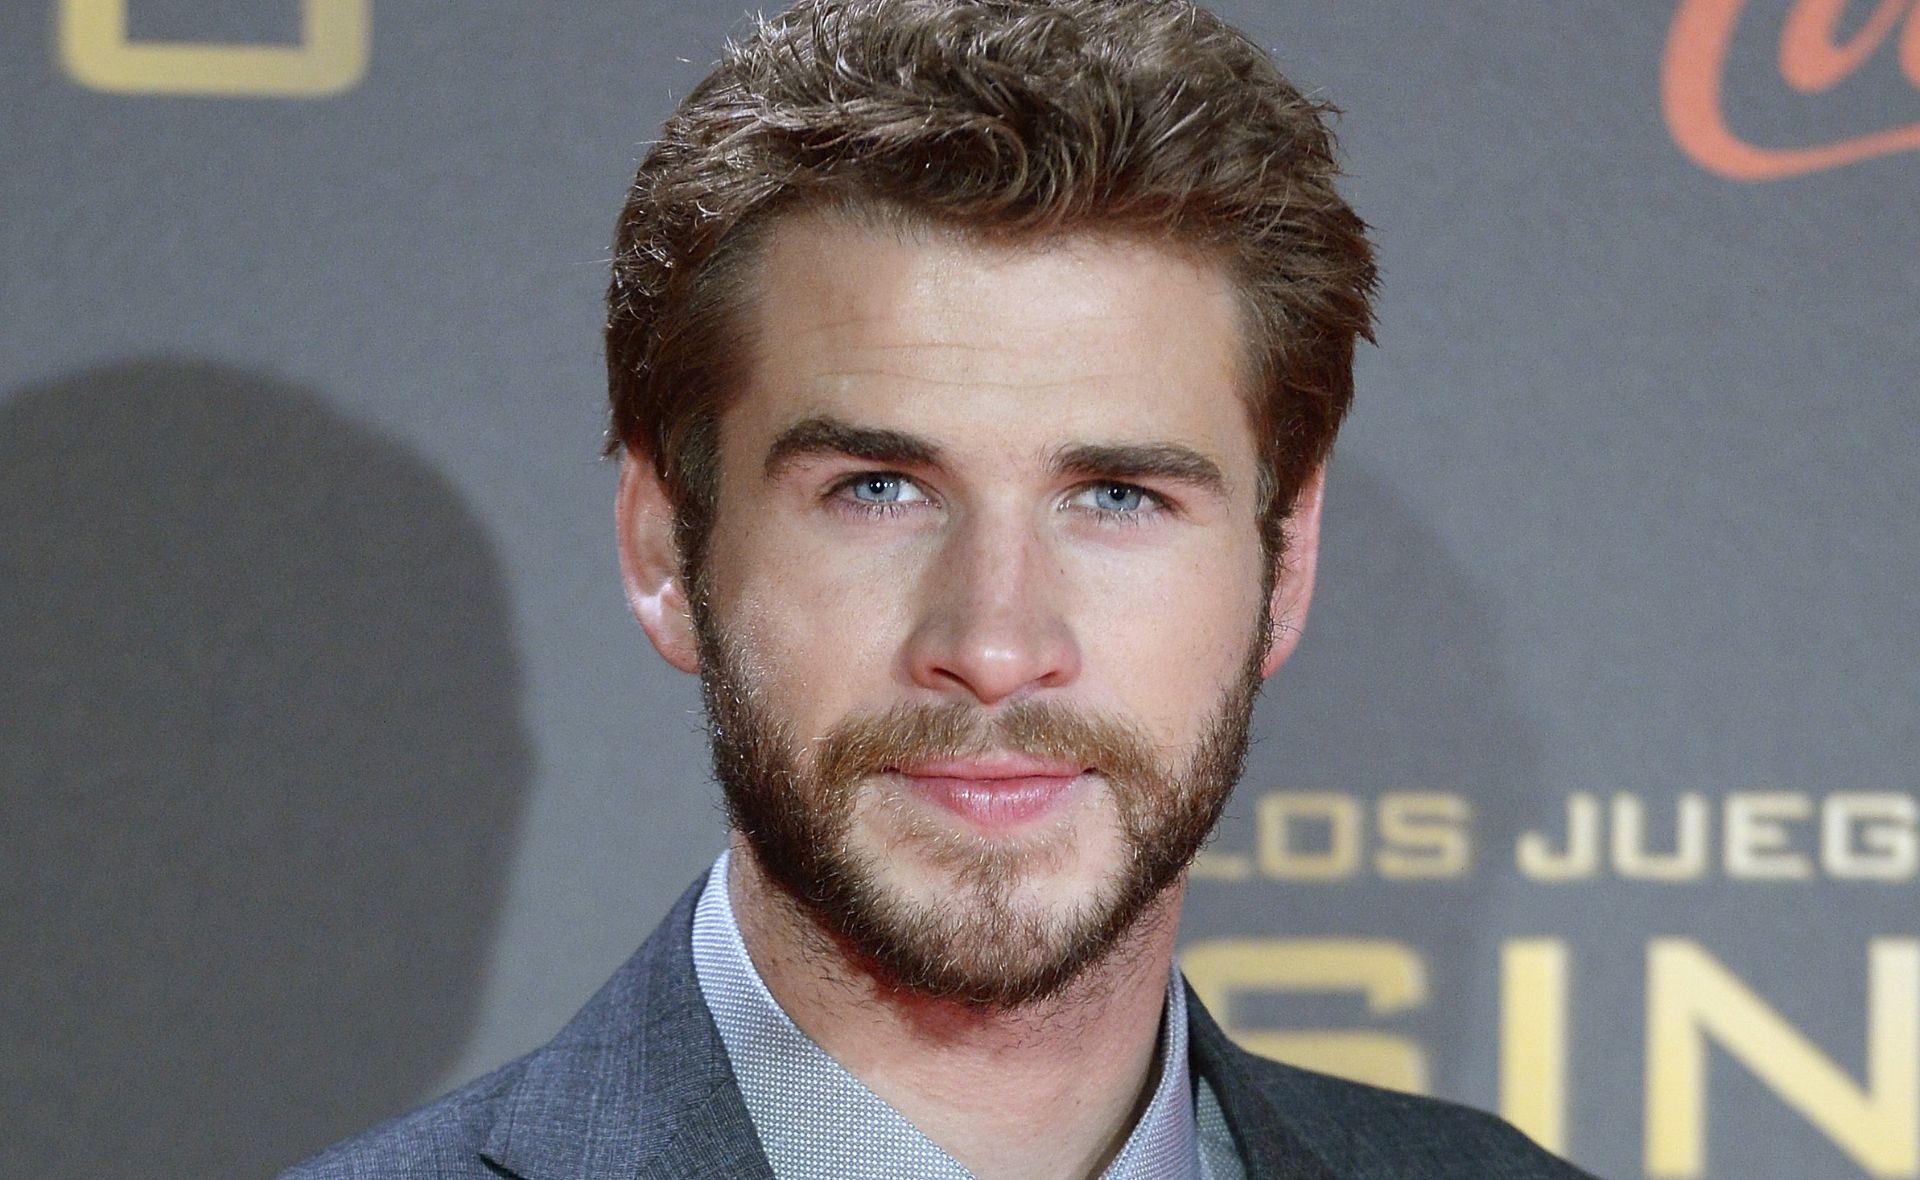 Liam Hemsworth is turning heads with his new Hollywood role which has divided fans